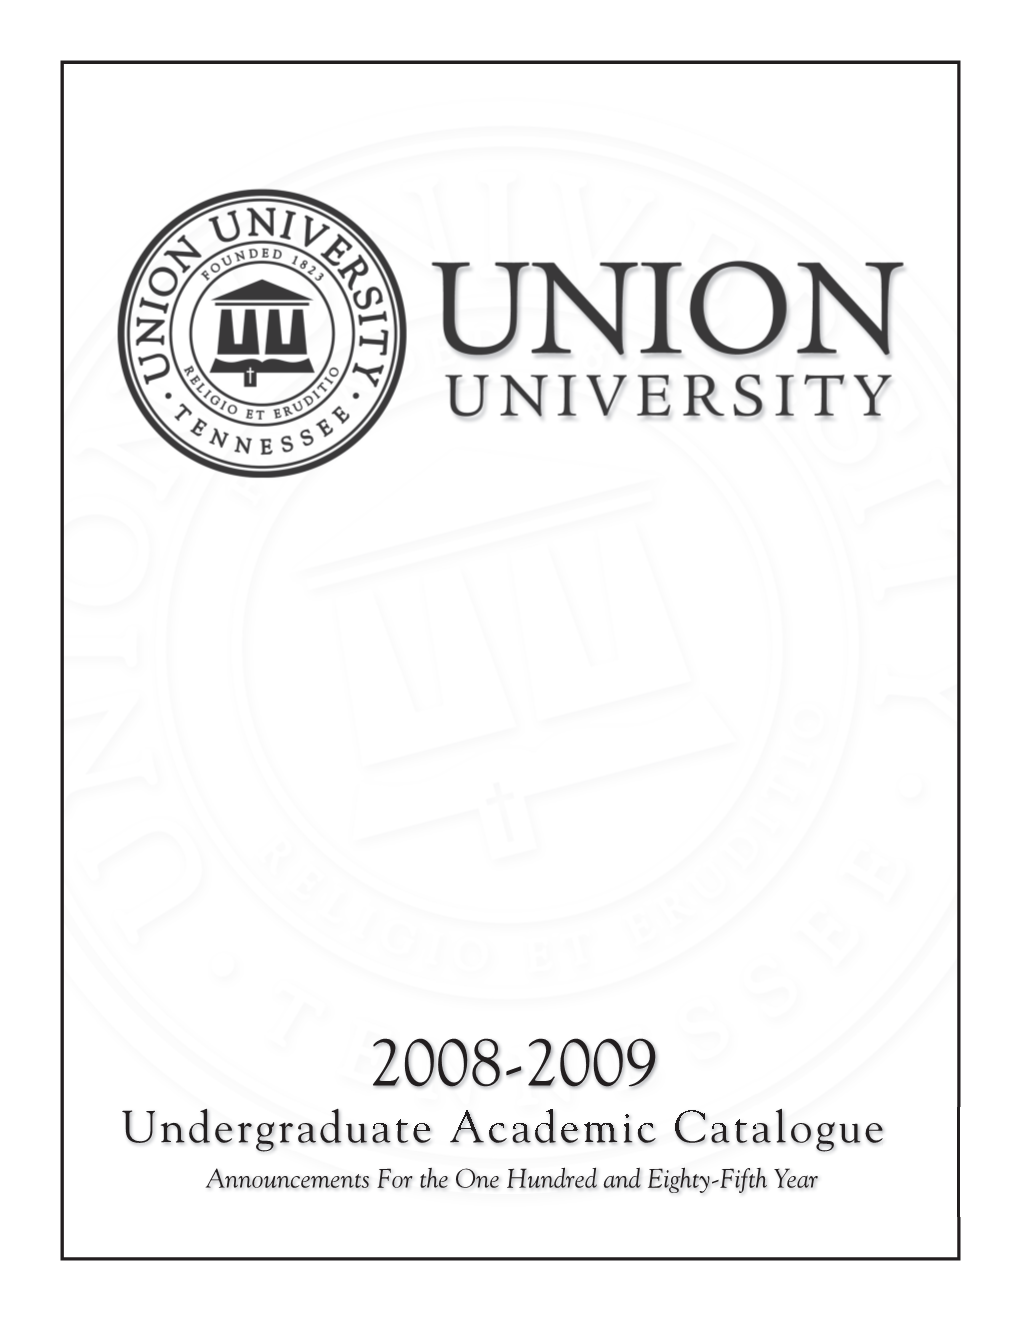 Undergraduate Academic Catalogue Announcements for the One Hundred and Eighty-Fifth Year Since 1823